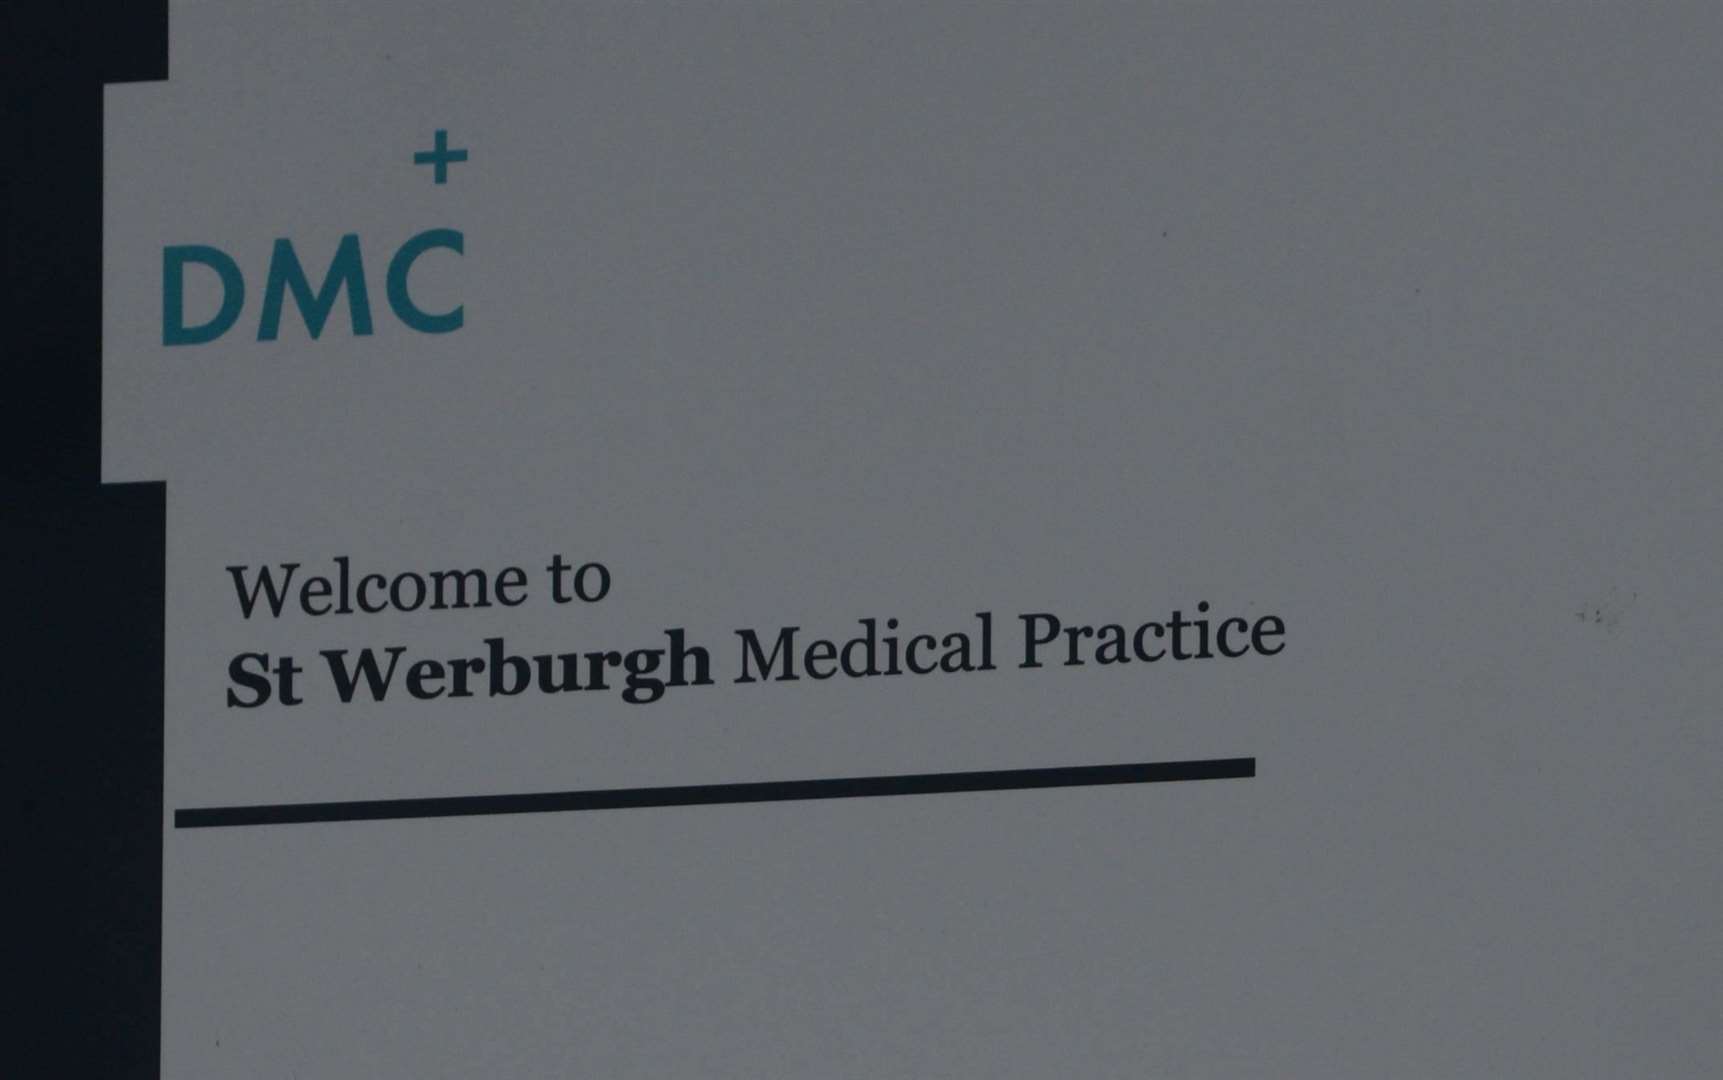 The Hoo St Werburgh Medical Practice in Bells Lane contract will also be cancelled after DMC was told it was not performing well enough